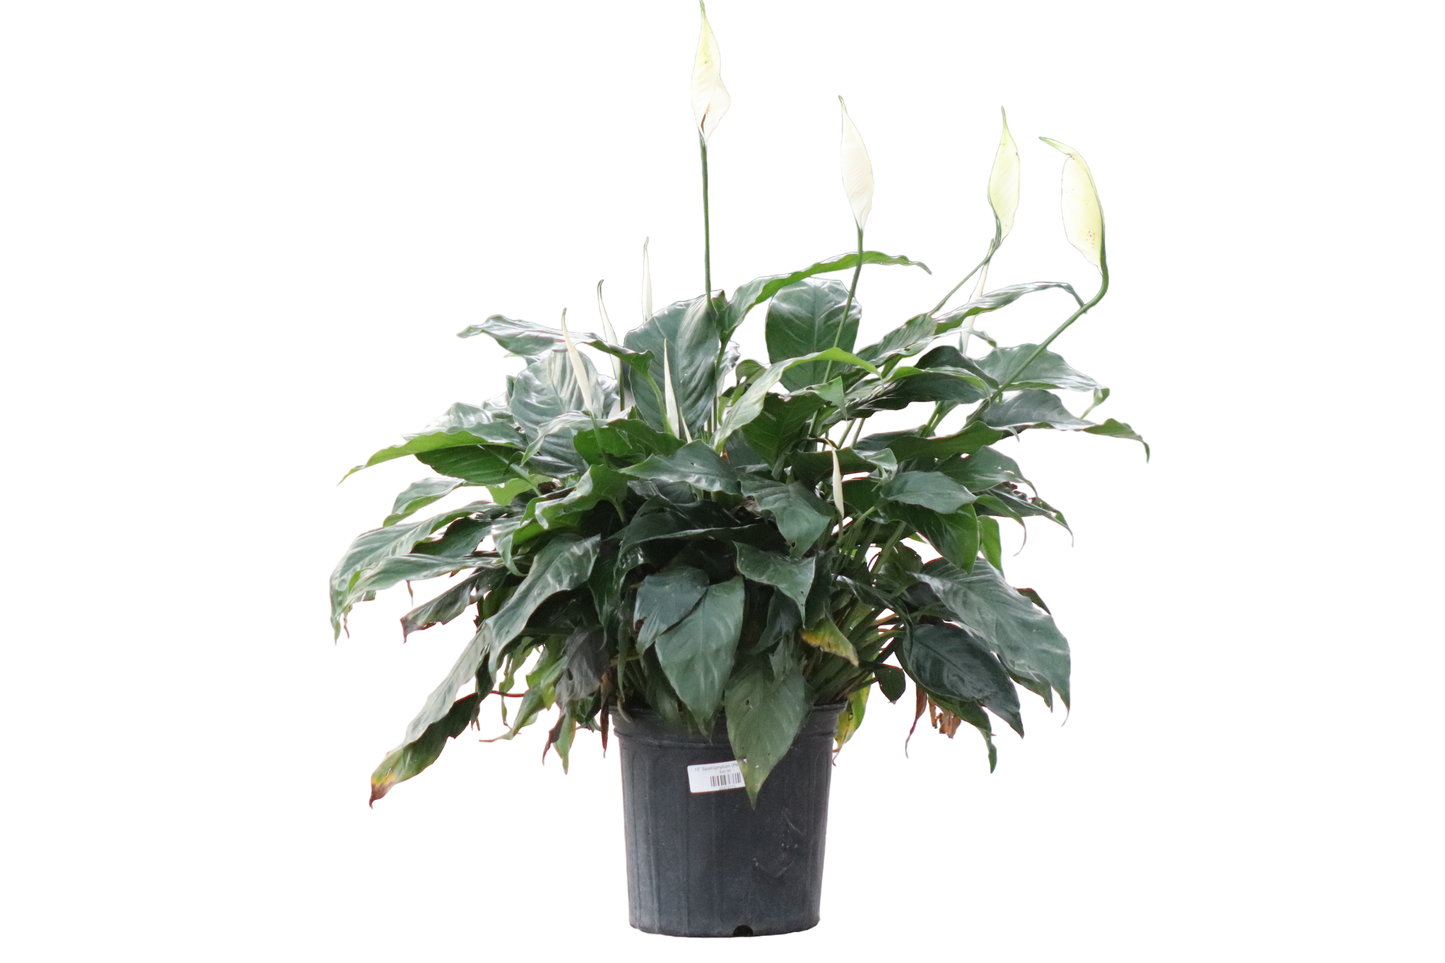 10” Spathiphyllum (Peace Lily)